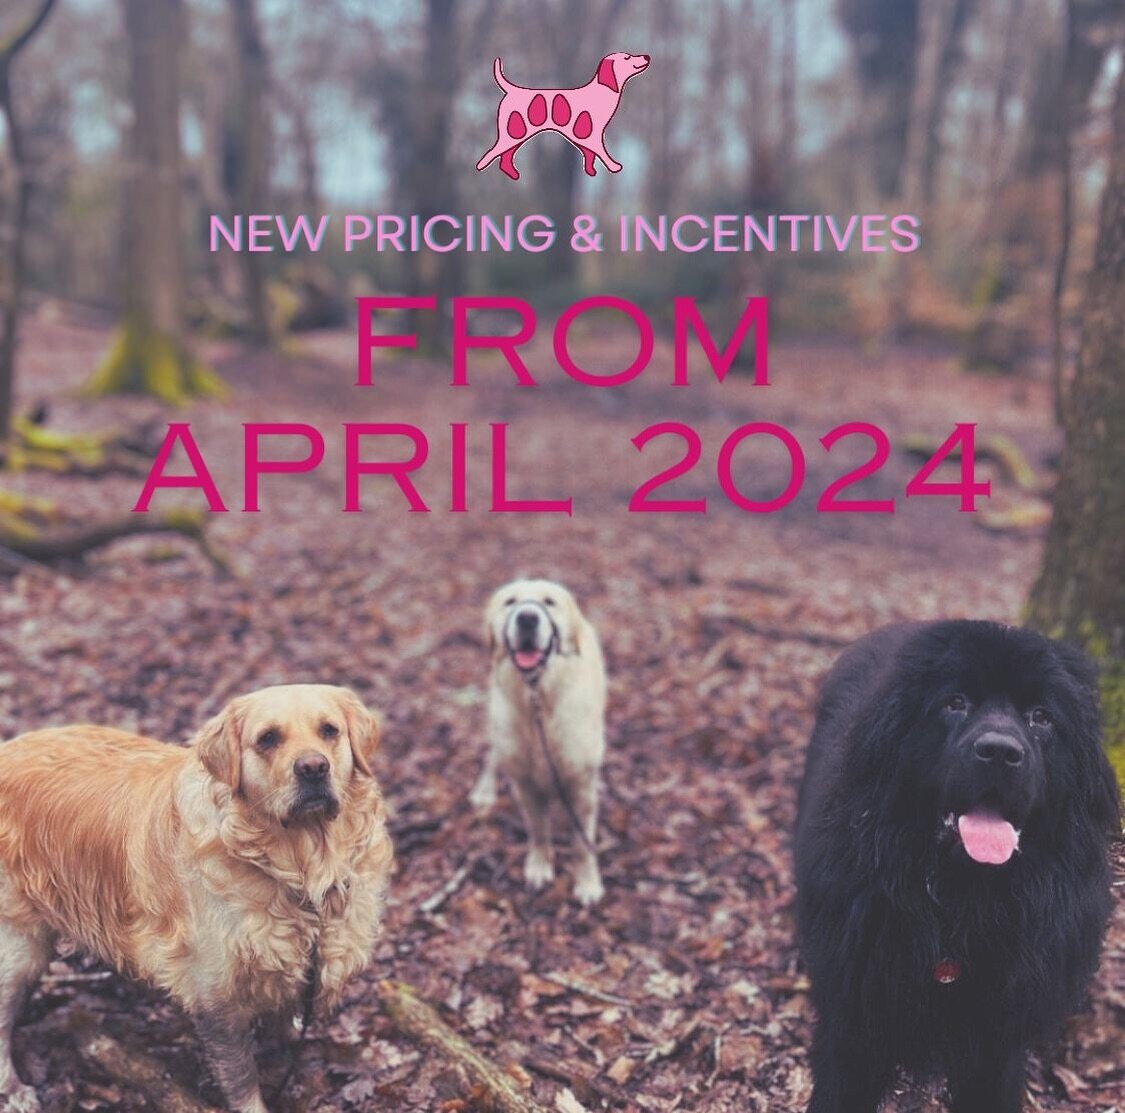 💞 Important Post 💞

If you&rsquo;re one of our clients in any of the areas we operate in, in March you will have probably heard from your pet care provider that we have an updated pricing structure with new incentives that will take effect from Apr